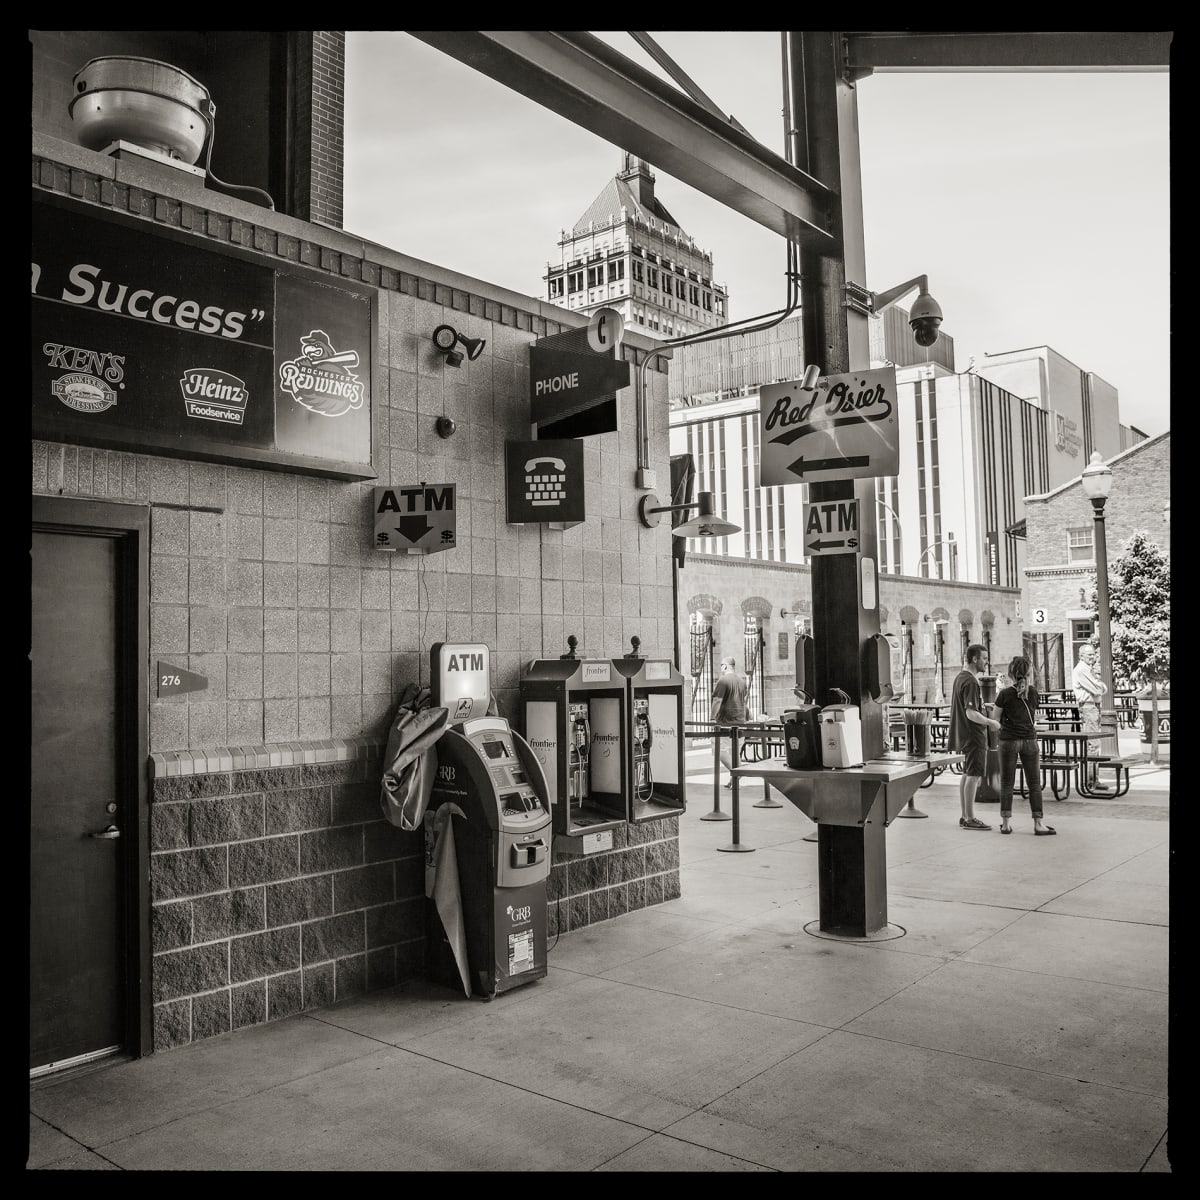 585.232.9300 & 585.232.9437 – Frontier Field, 333 N. Plymouth Ave., Rochester, NY 14608 by Eric T. Kunsman  Image: ID: A black and white image shows a wall on the left with an ATM and two pay phones.  At the end of the wall people are visible and the Kodak Tower is in the background.